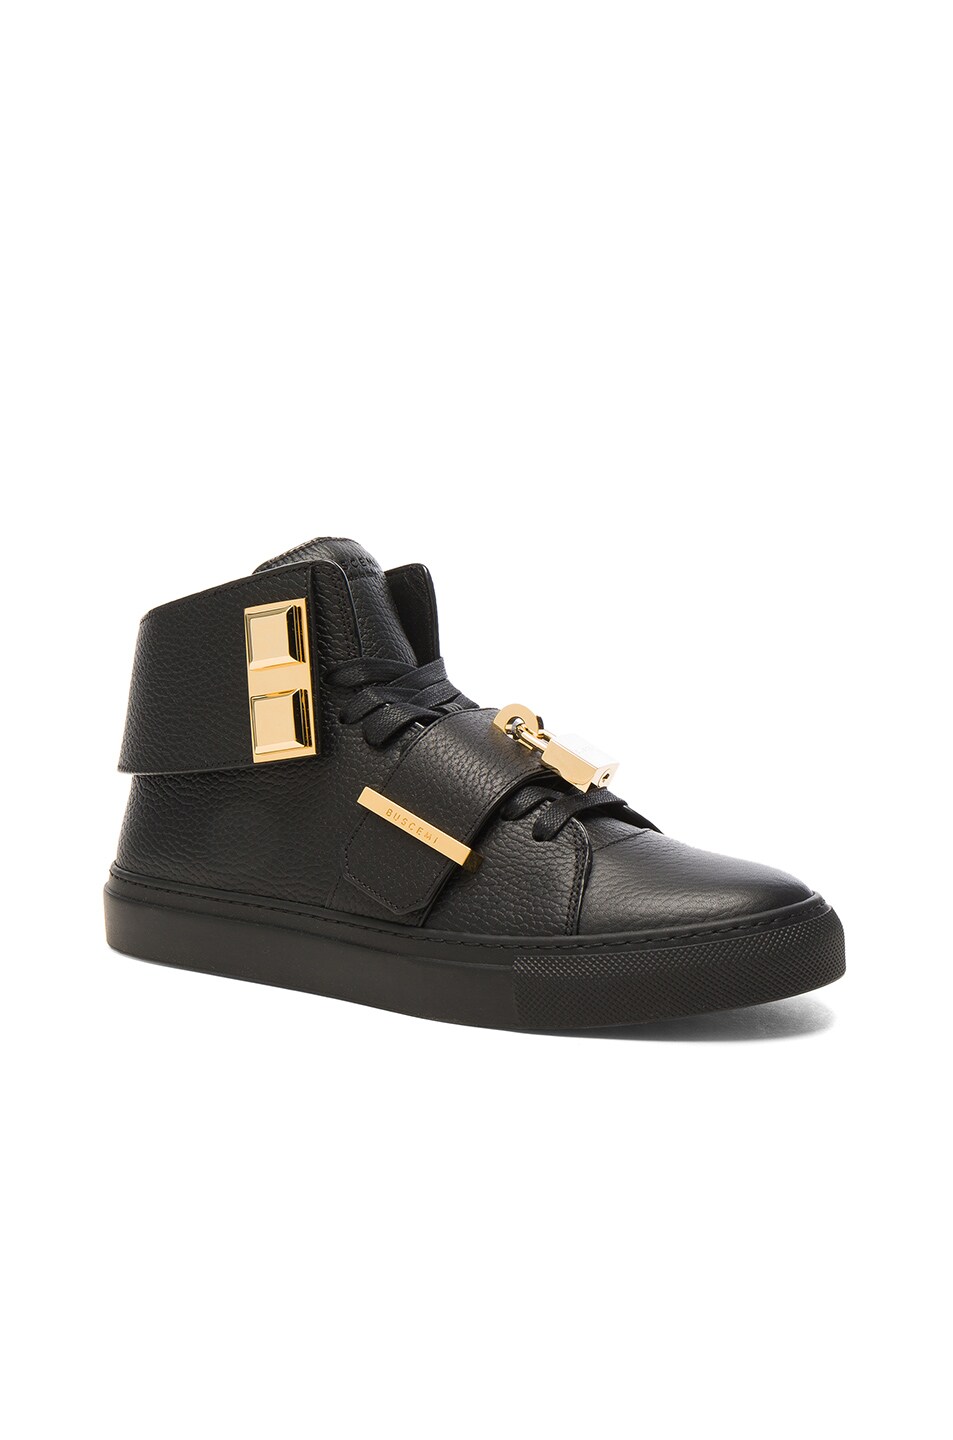 Image 1 of Buscemi Pebbled Leather Trap Sneakers in Black